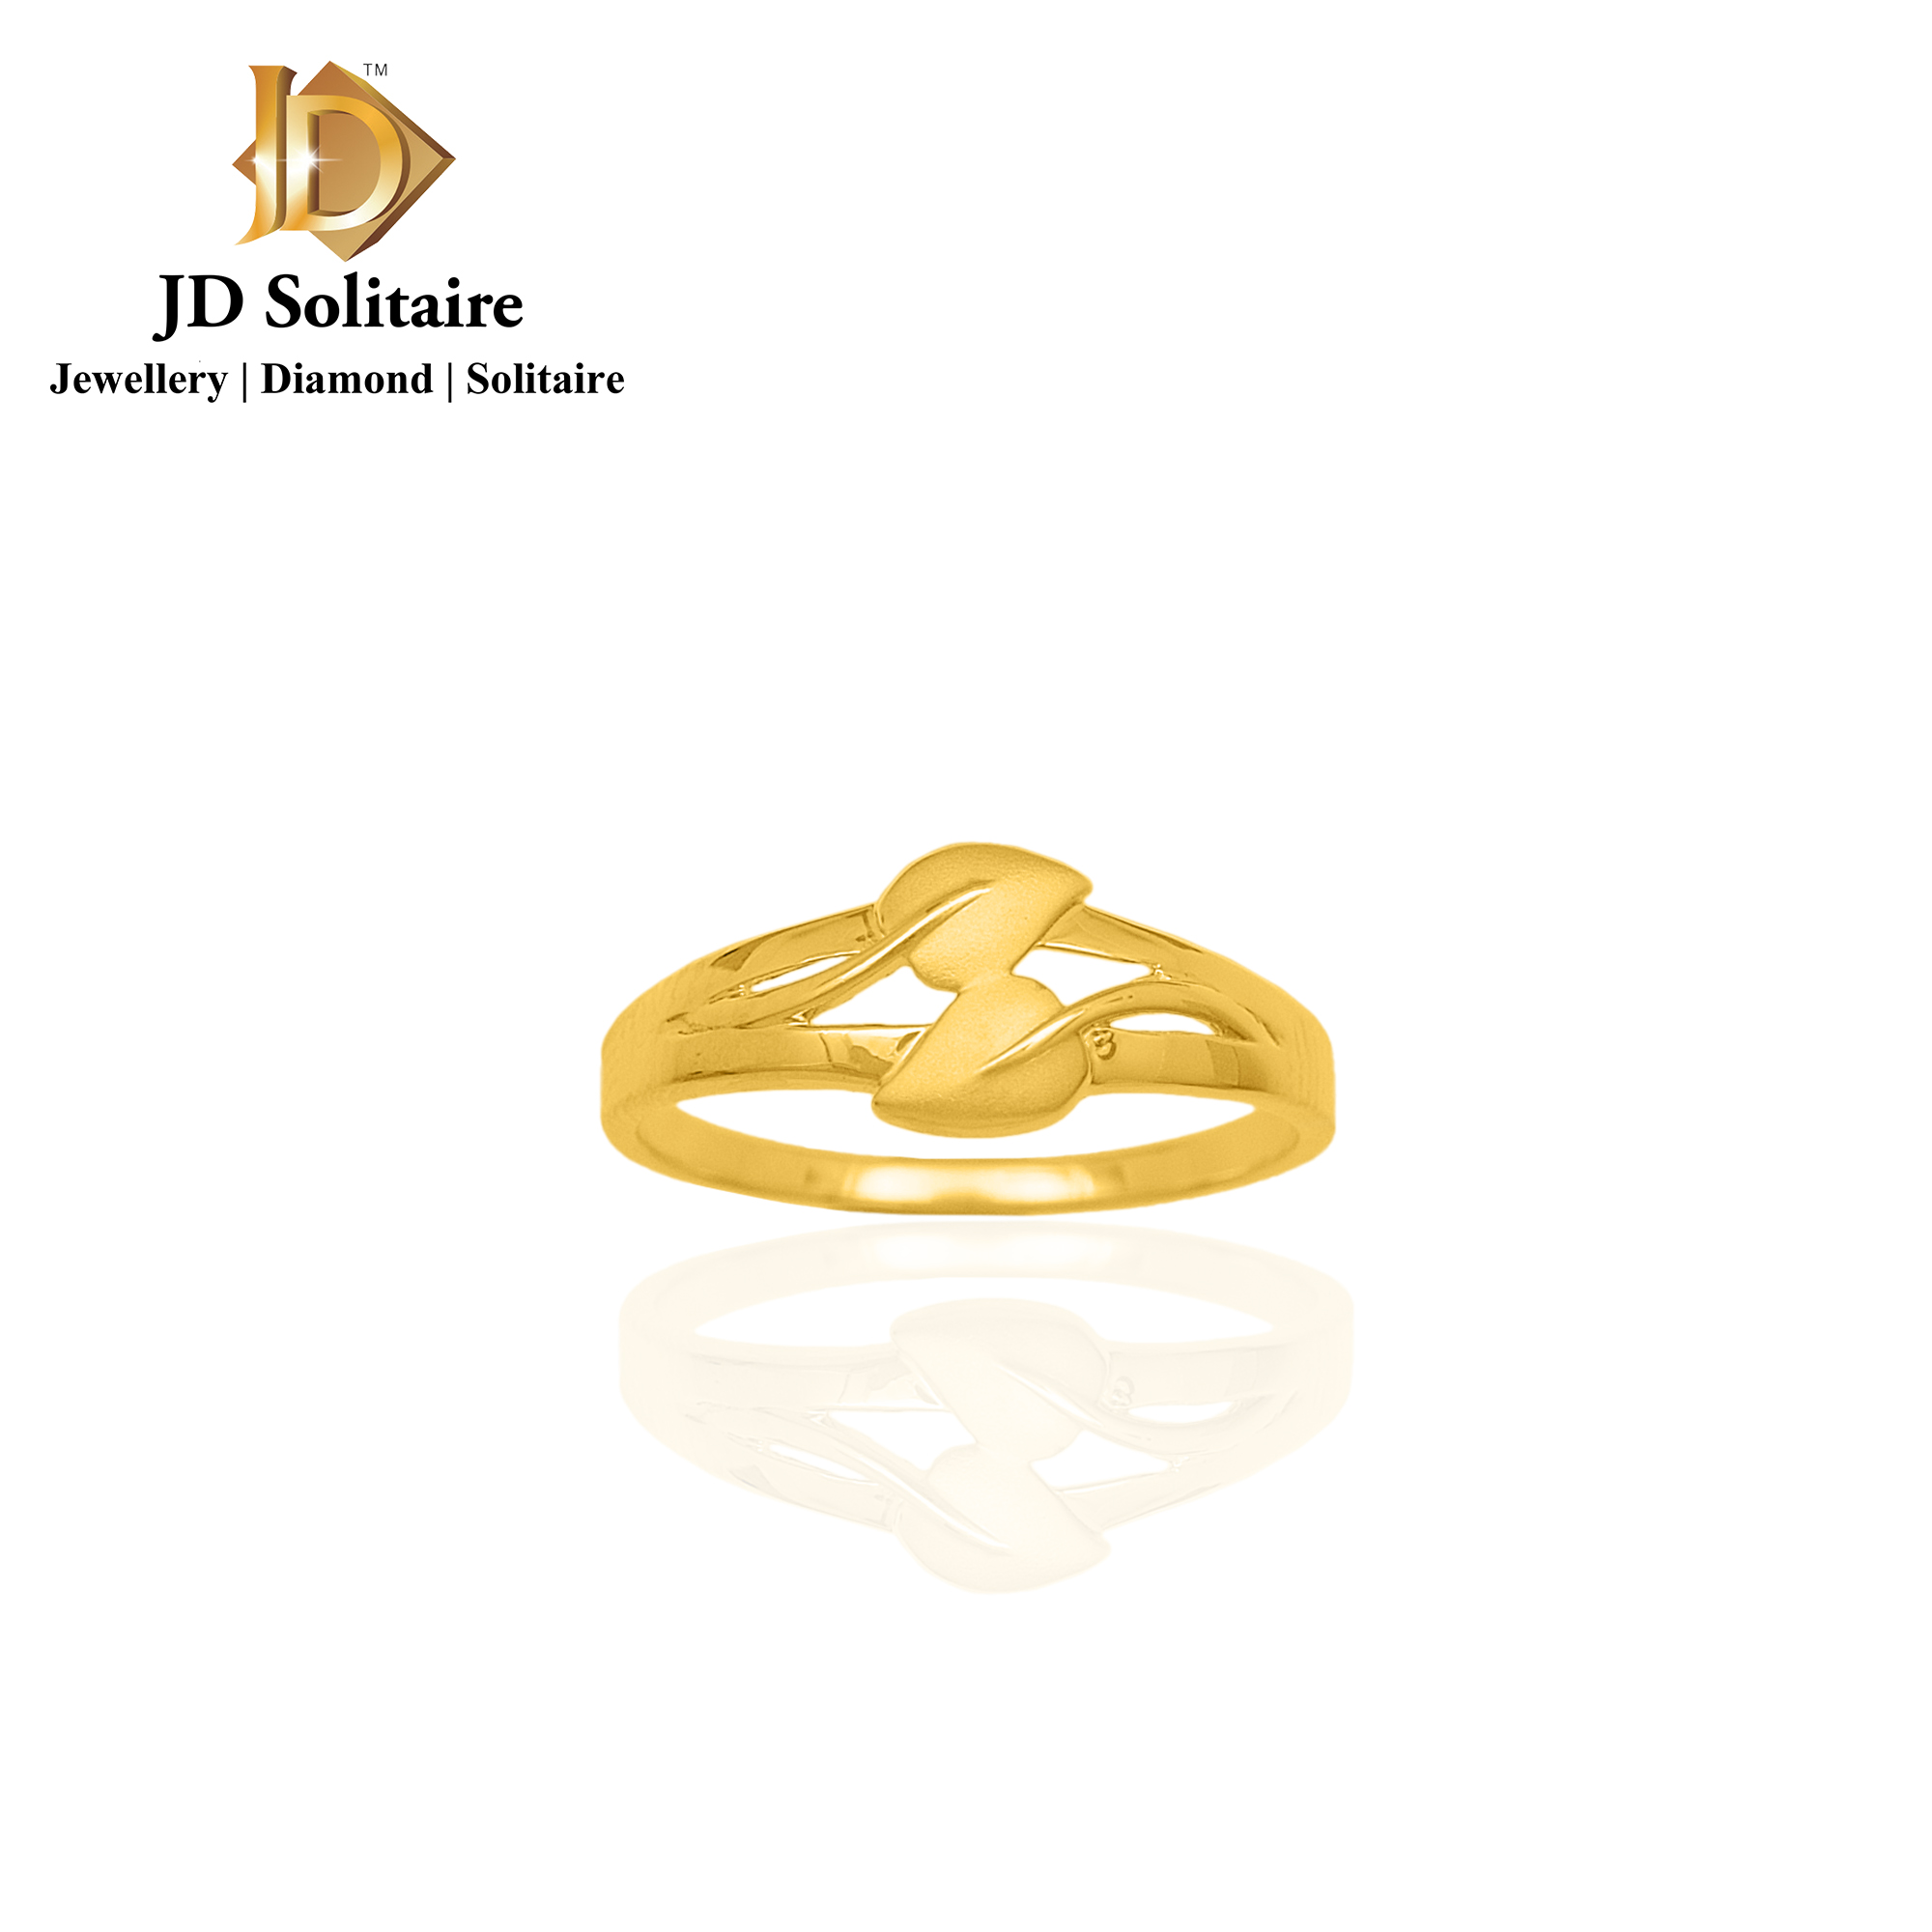 CIFICA The Brass gold Palleted ring design for female is made to exude  every woman's femininity